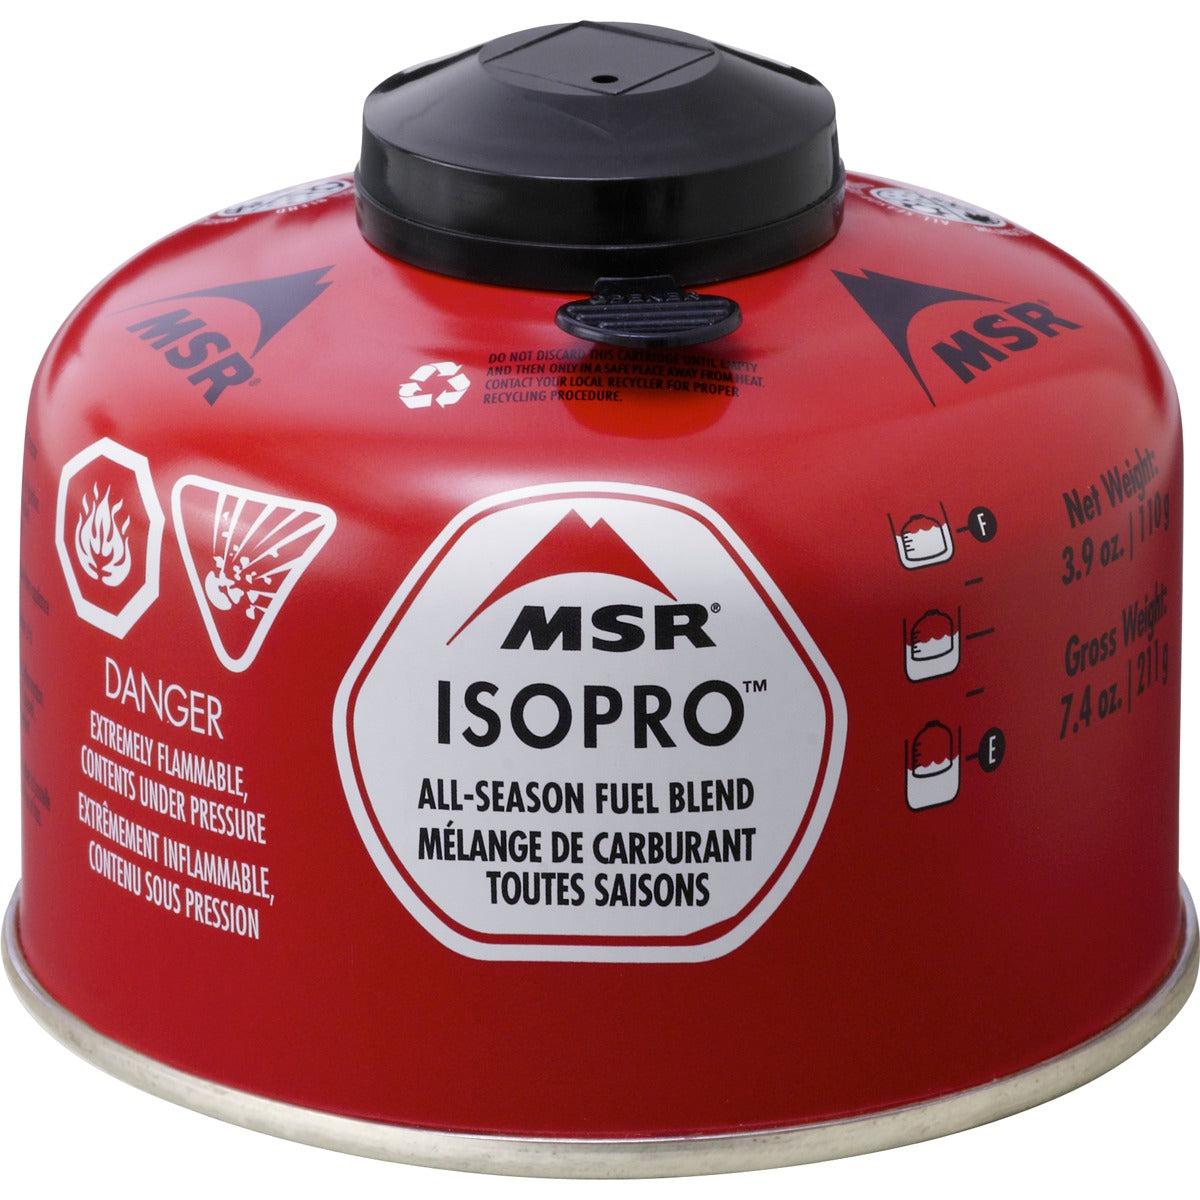 msr isopro gas cannister 100g all season fuel blend